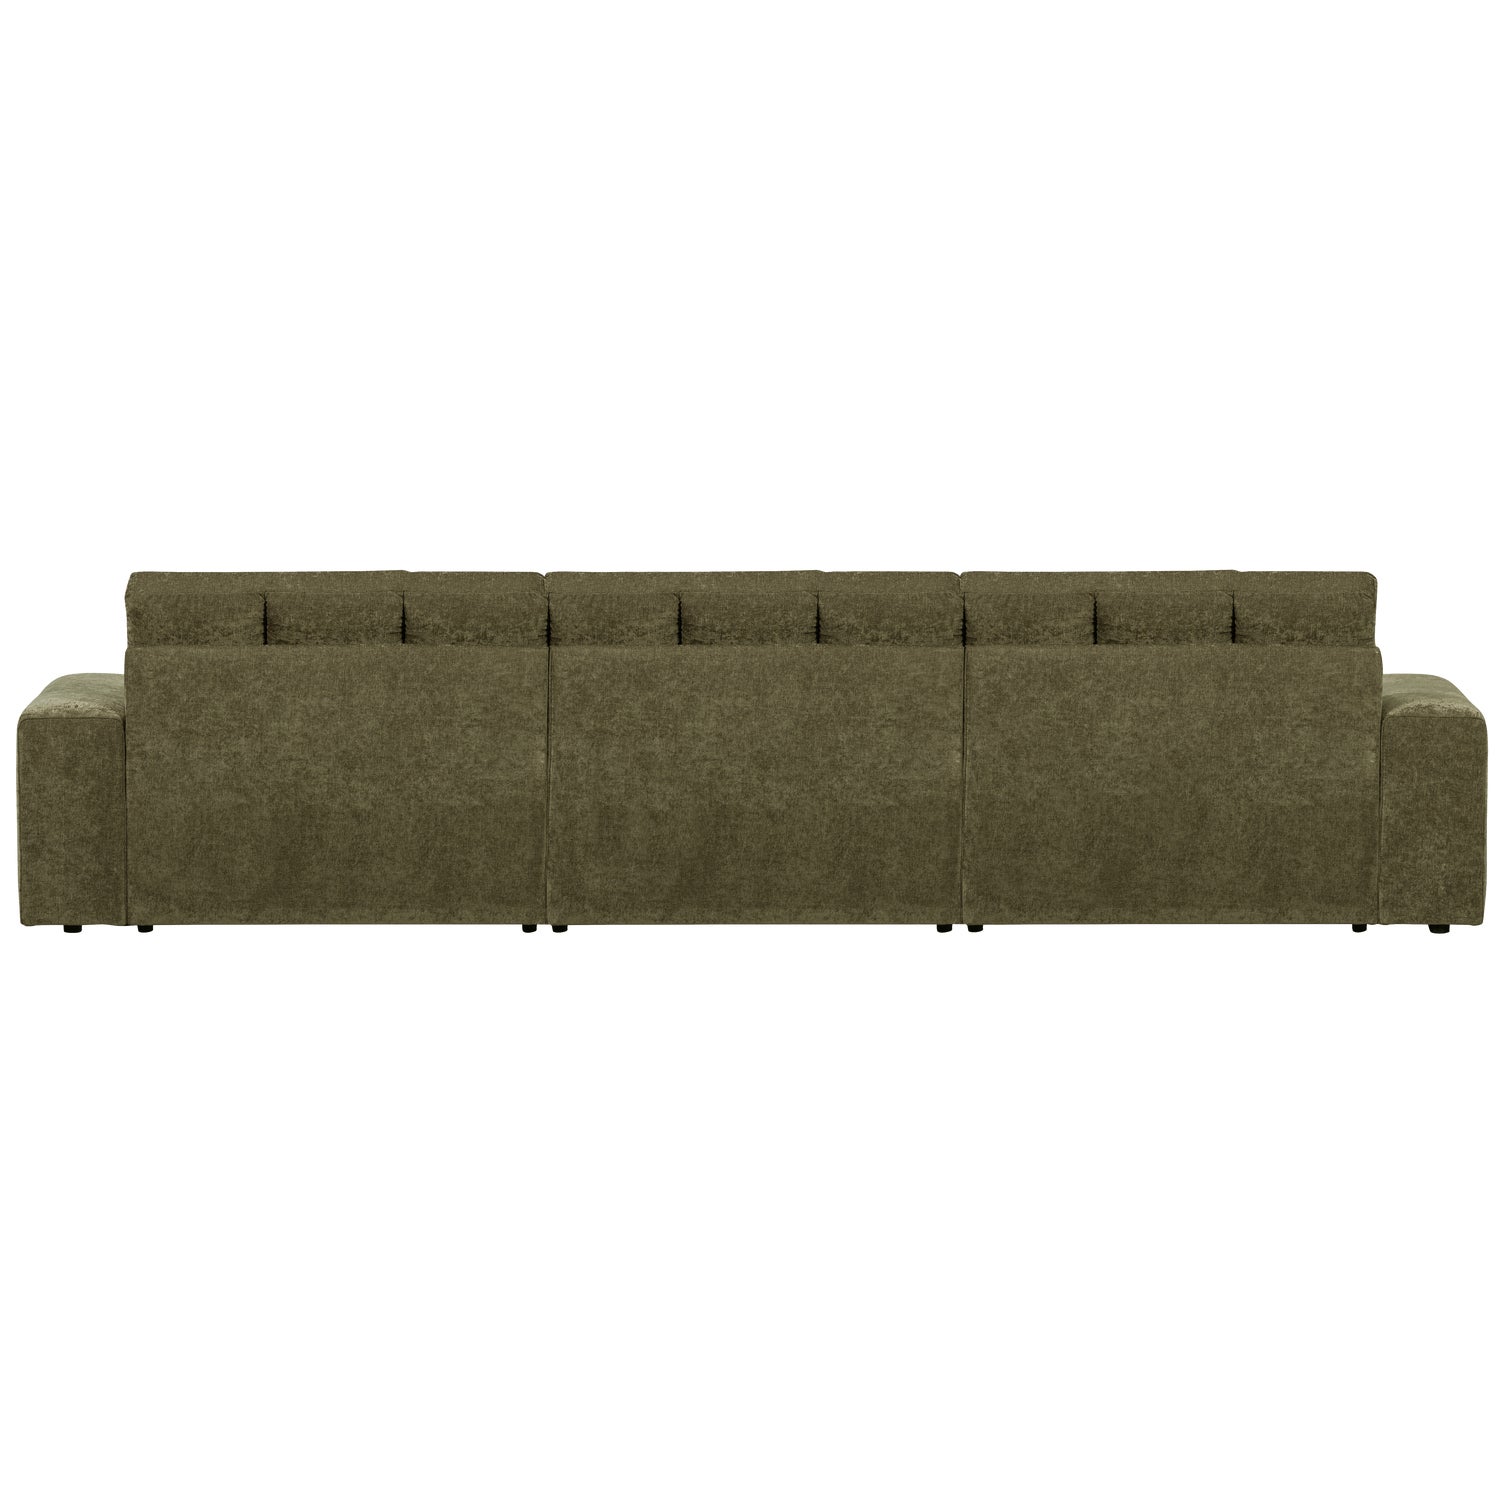 379012-G-02_VS_WE_Second_date_chaise_longue_links_vintage_groen_AK1.png?auto=webp&format=png&width=1500&height=1500